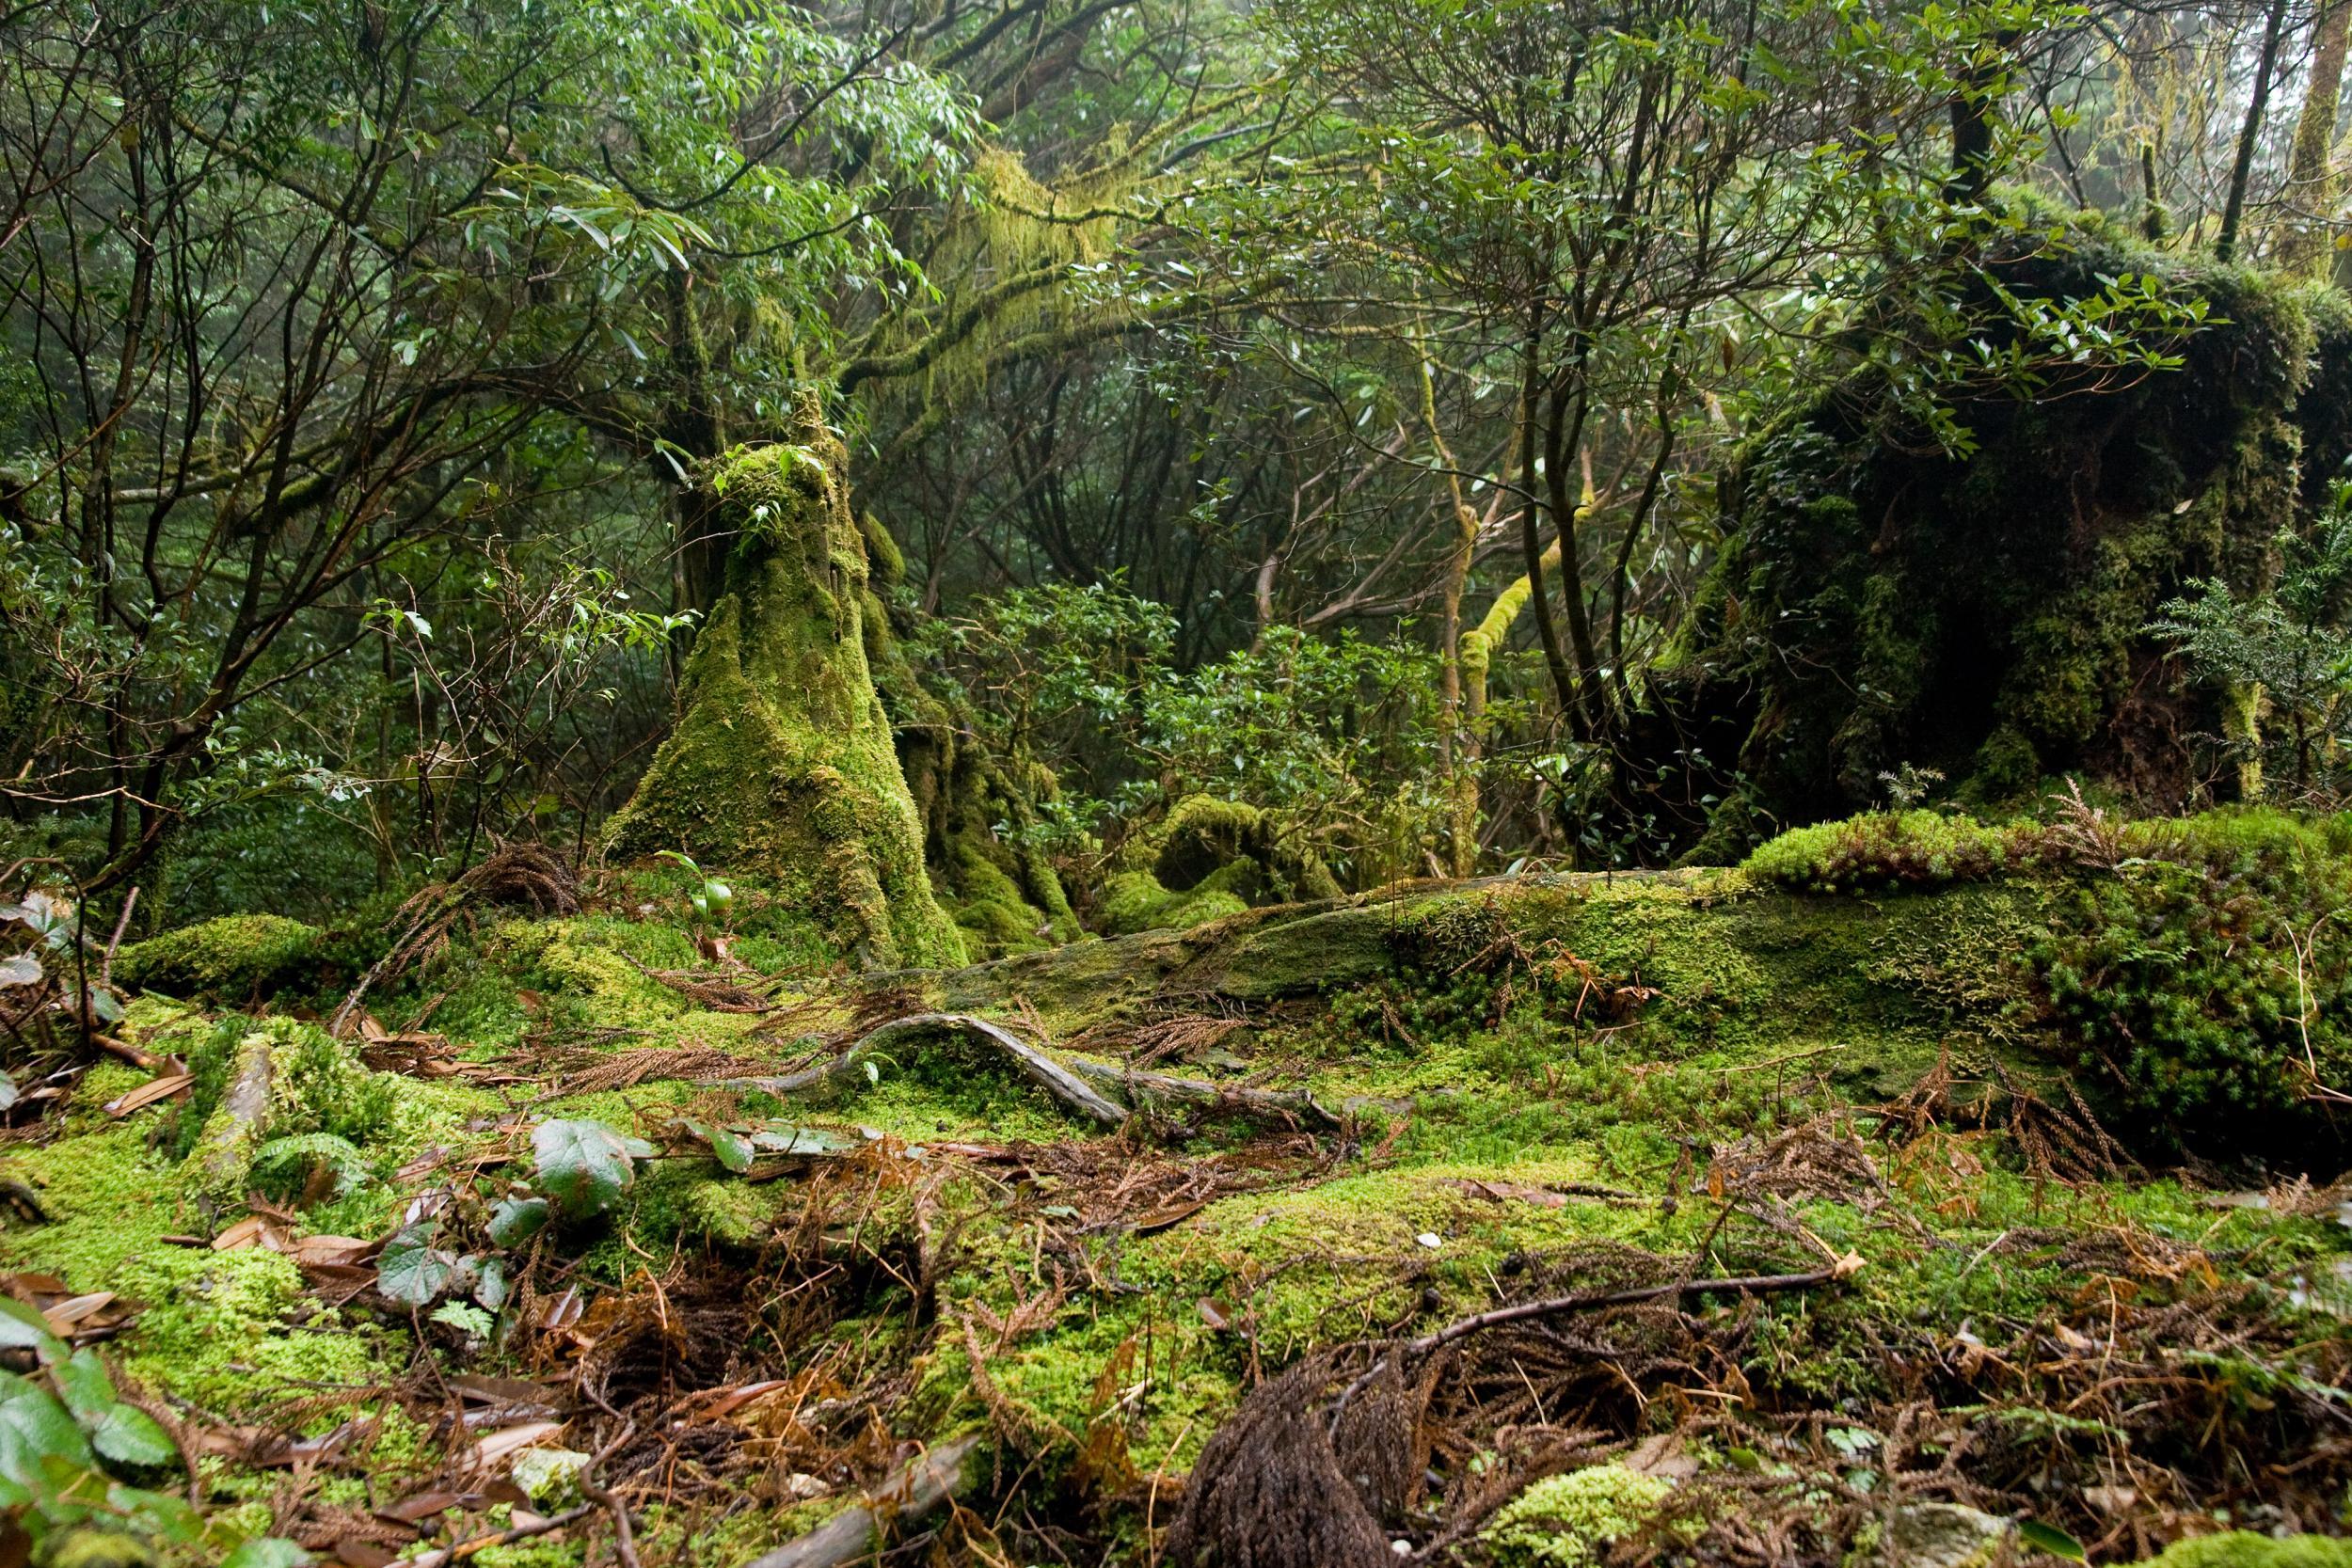 The cedar forests on Yakushima are an ideal place to soak up the forest